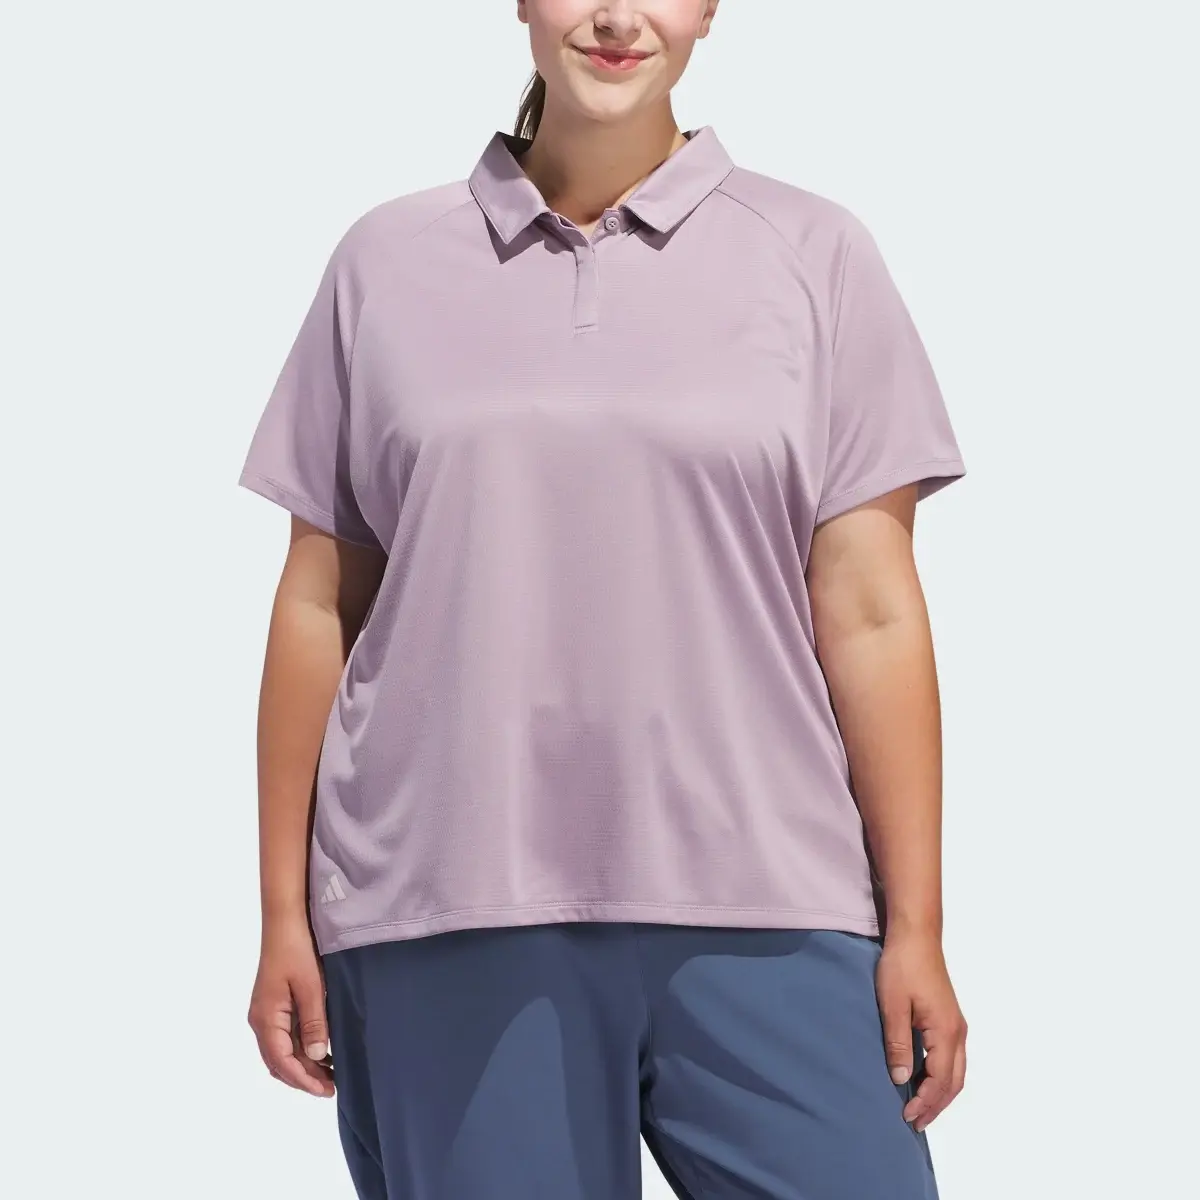 Adidas Polo HEAT.RDY Ultimate365 – Mulher (Plus Size). 1